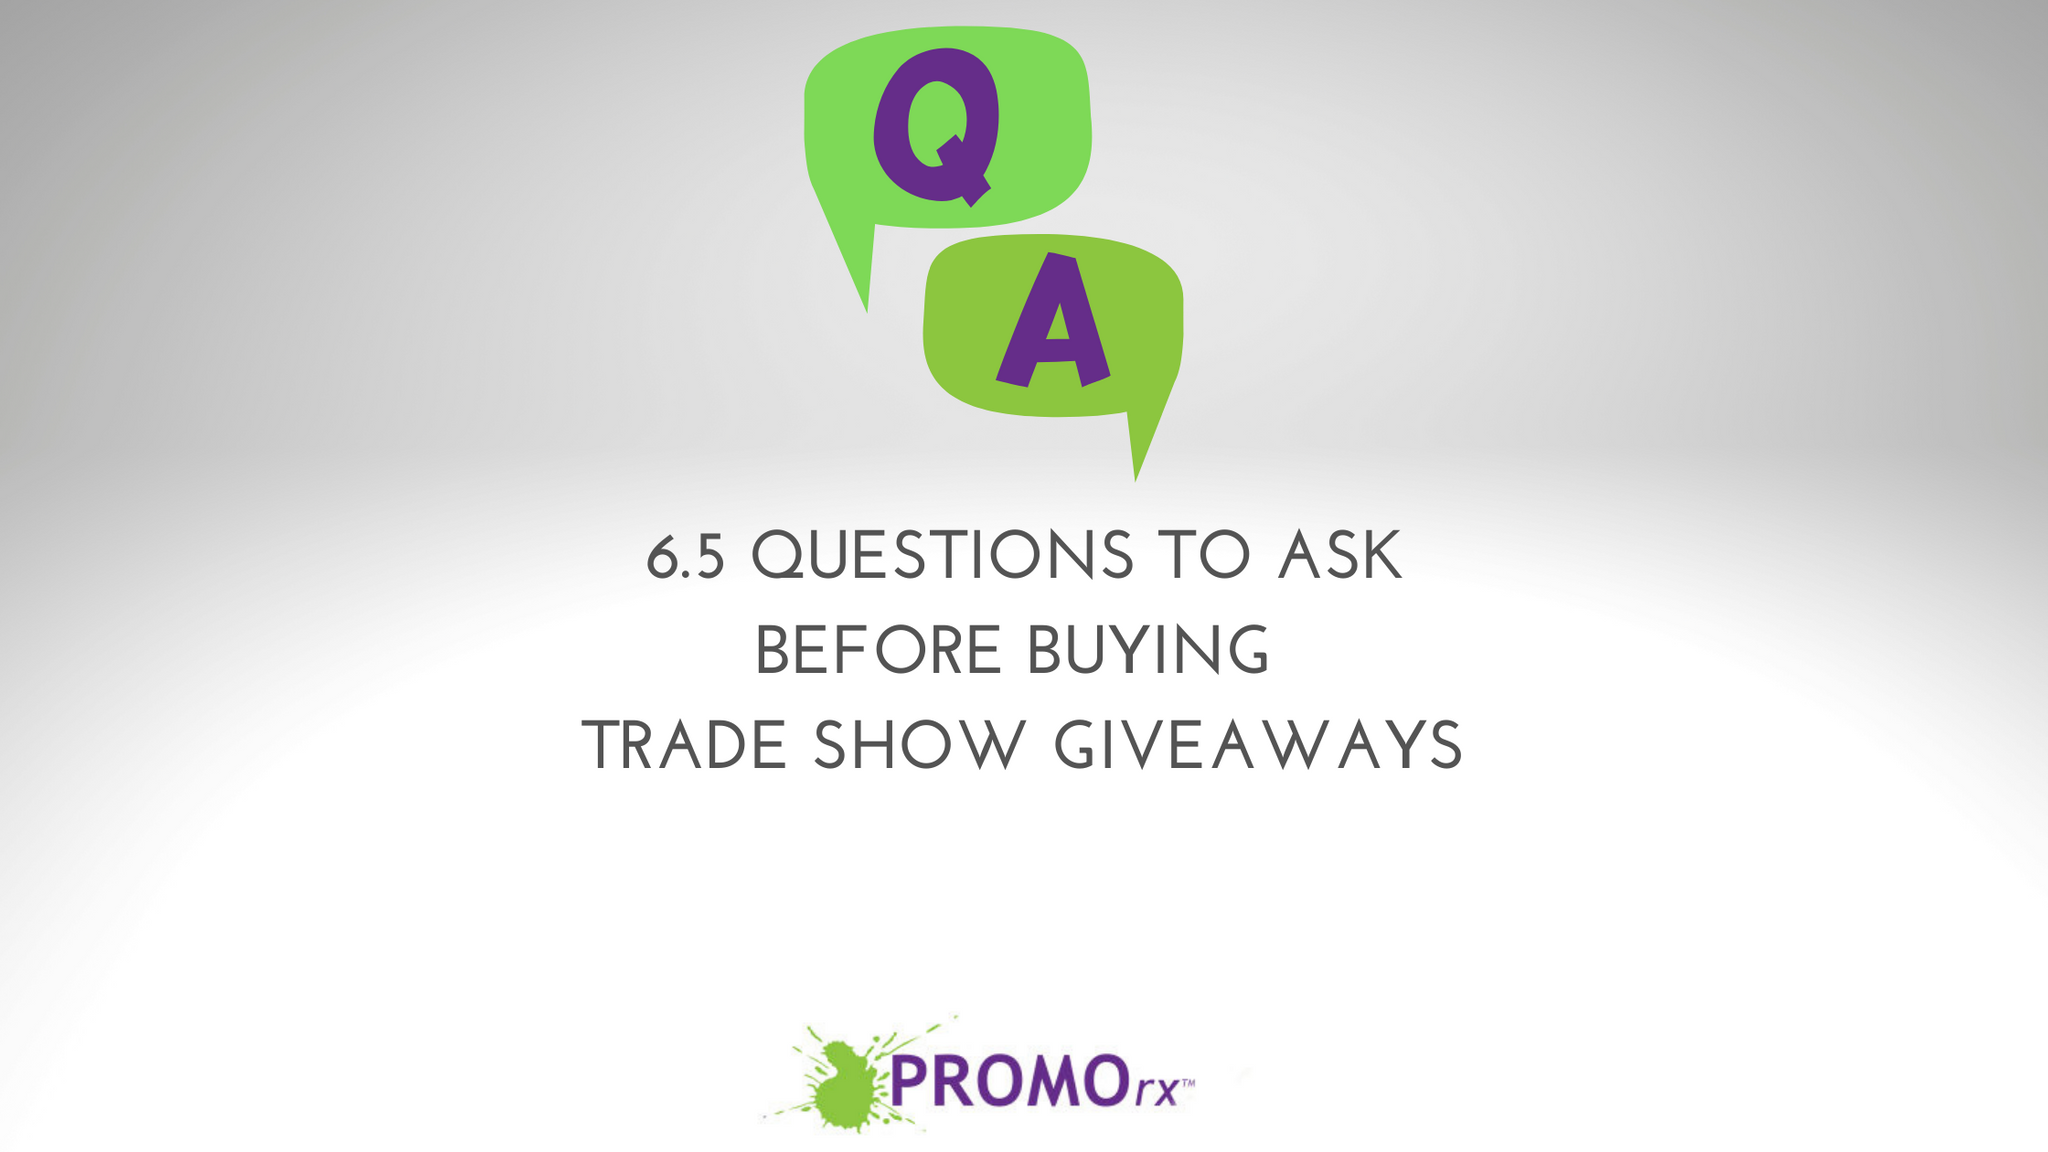 6.5 Questions To Ask BEFORE Buying Trade Show Giveaways